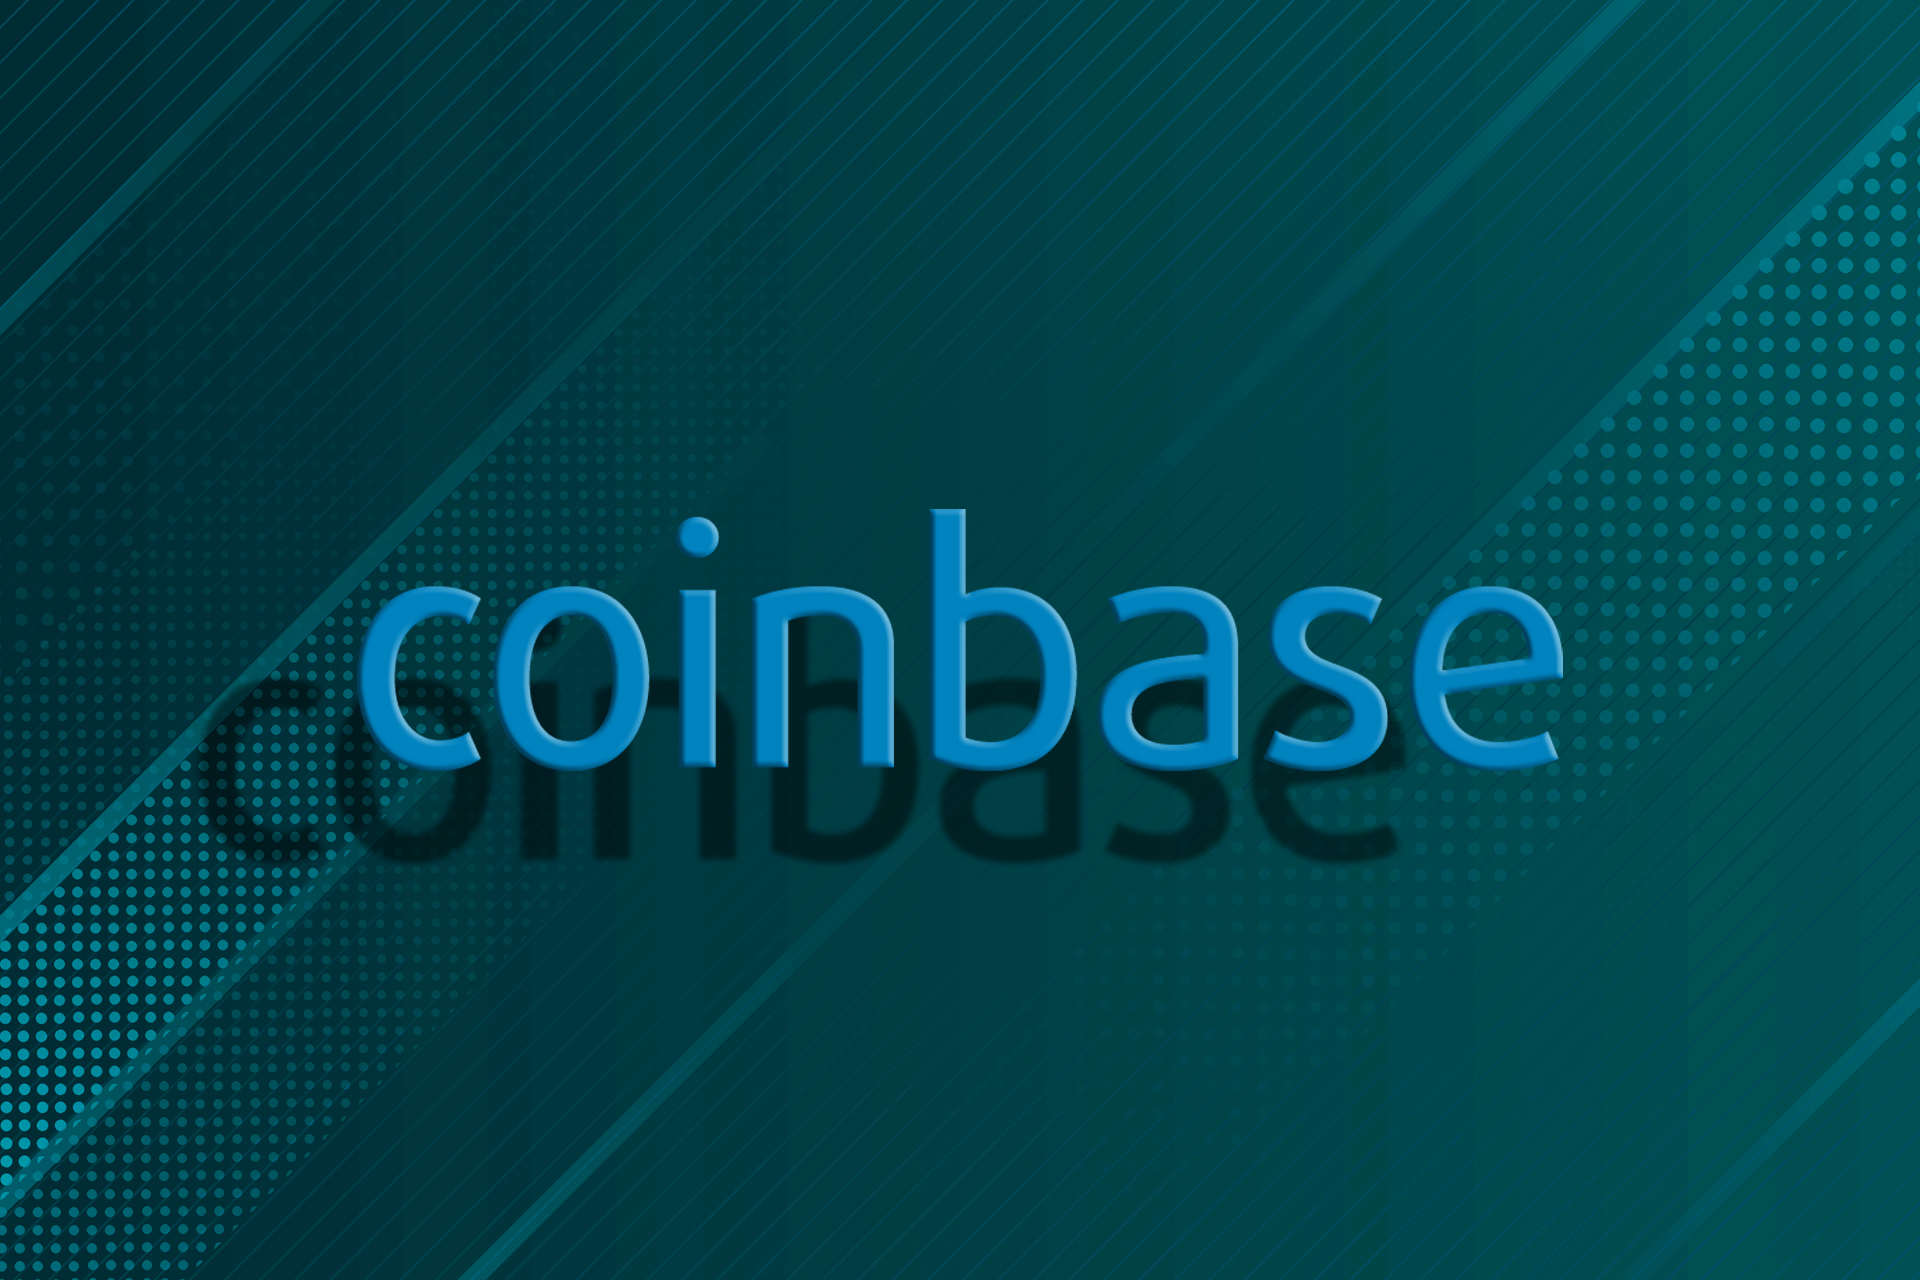 Don’t accept New terms of service to avoid Coinbase phishing